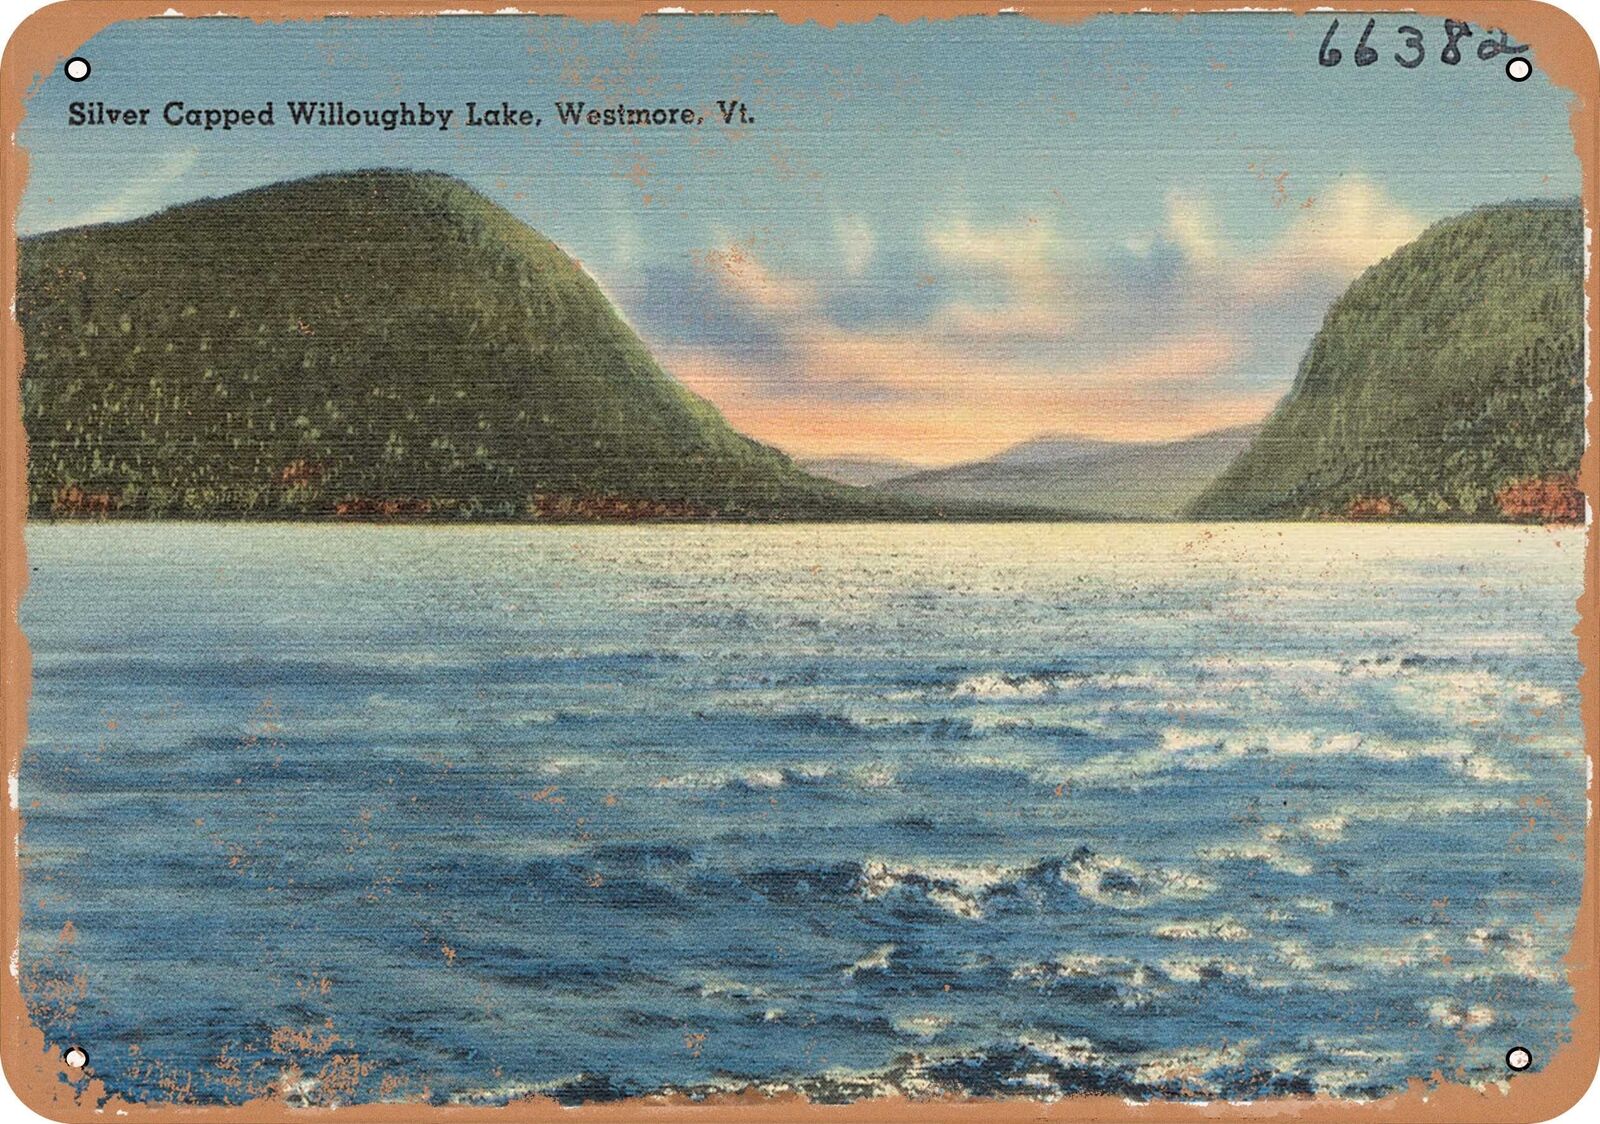 Metal Sign - Vermont Postcard - Silver Capped Willoughby Lake, Westmore, Vt.